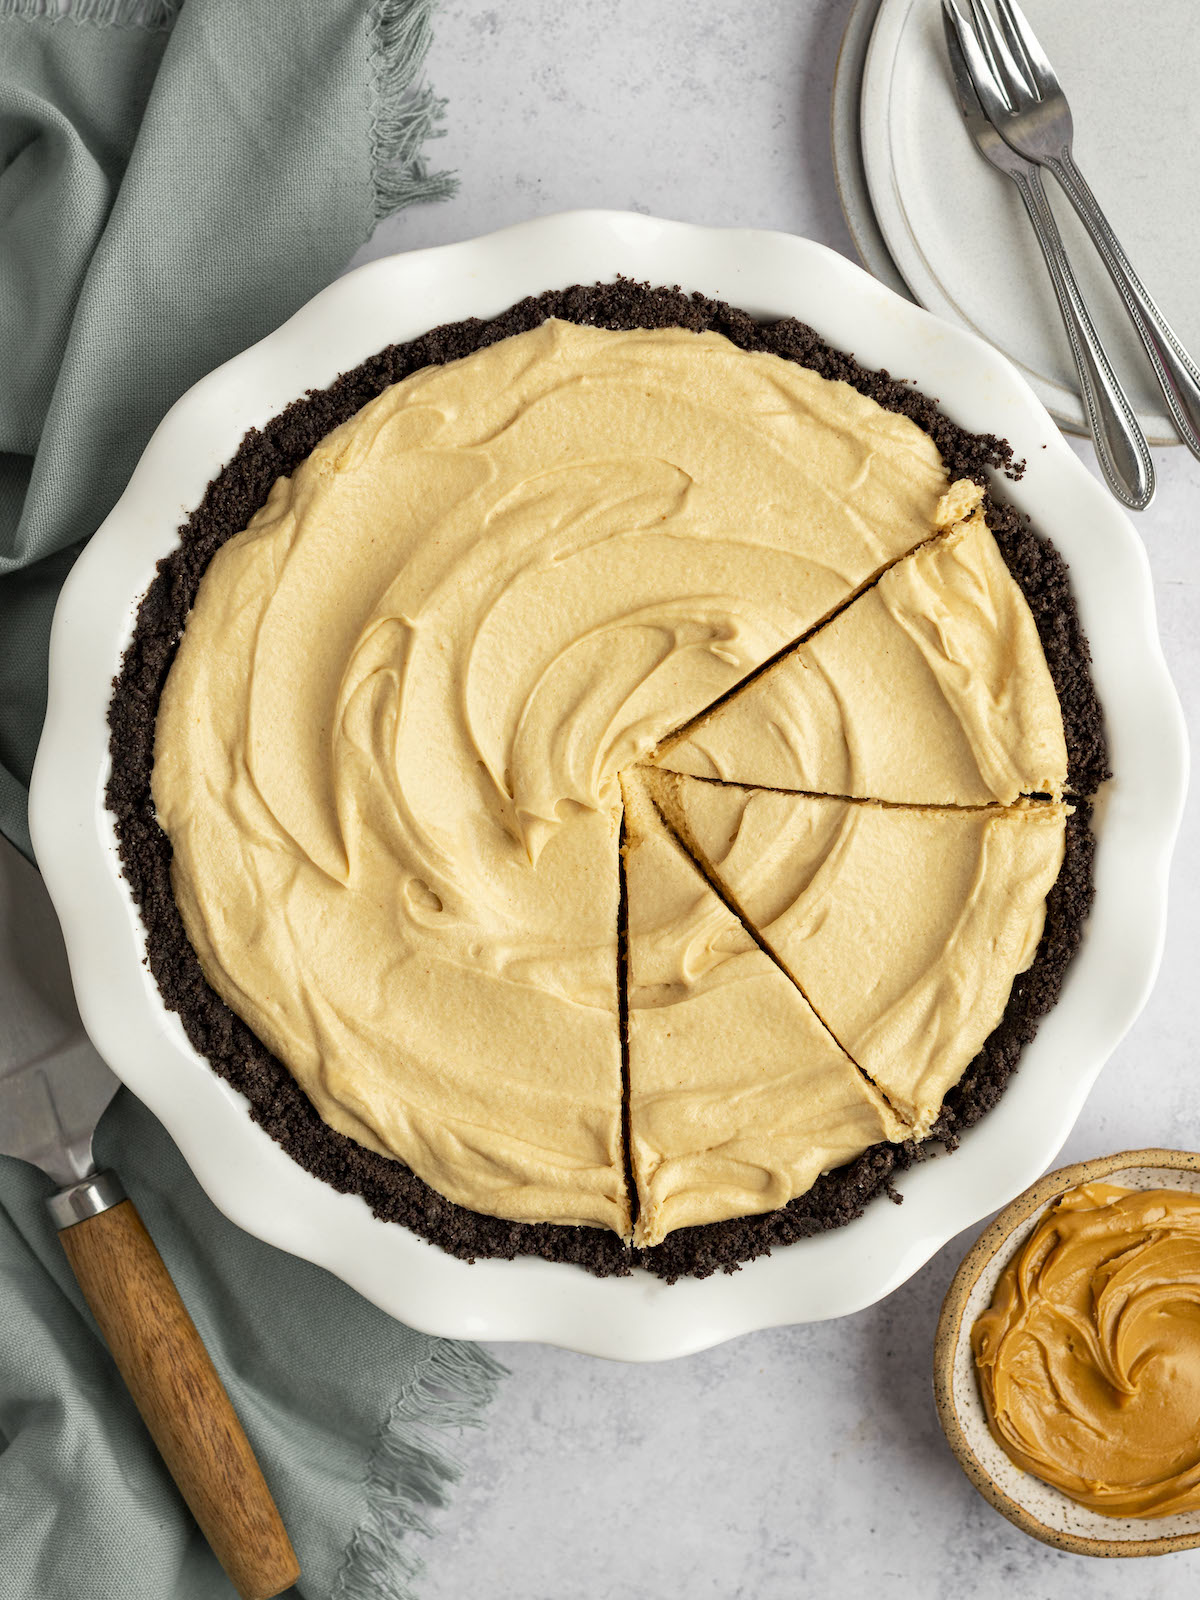 peanut butter pie with slices cut